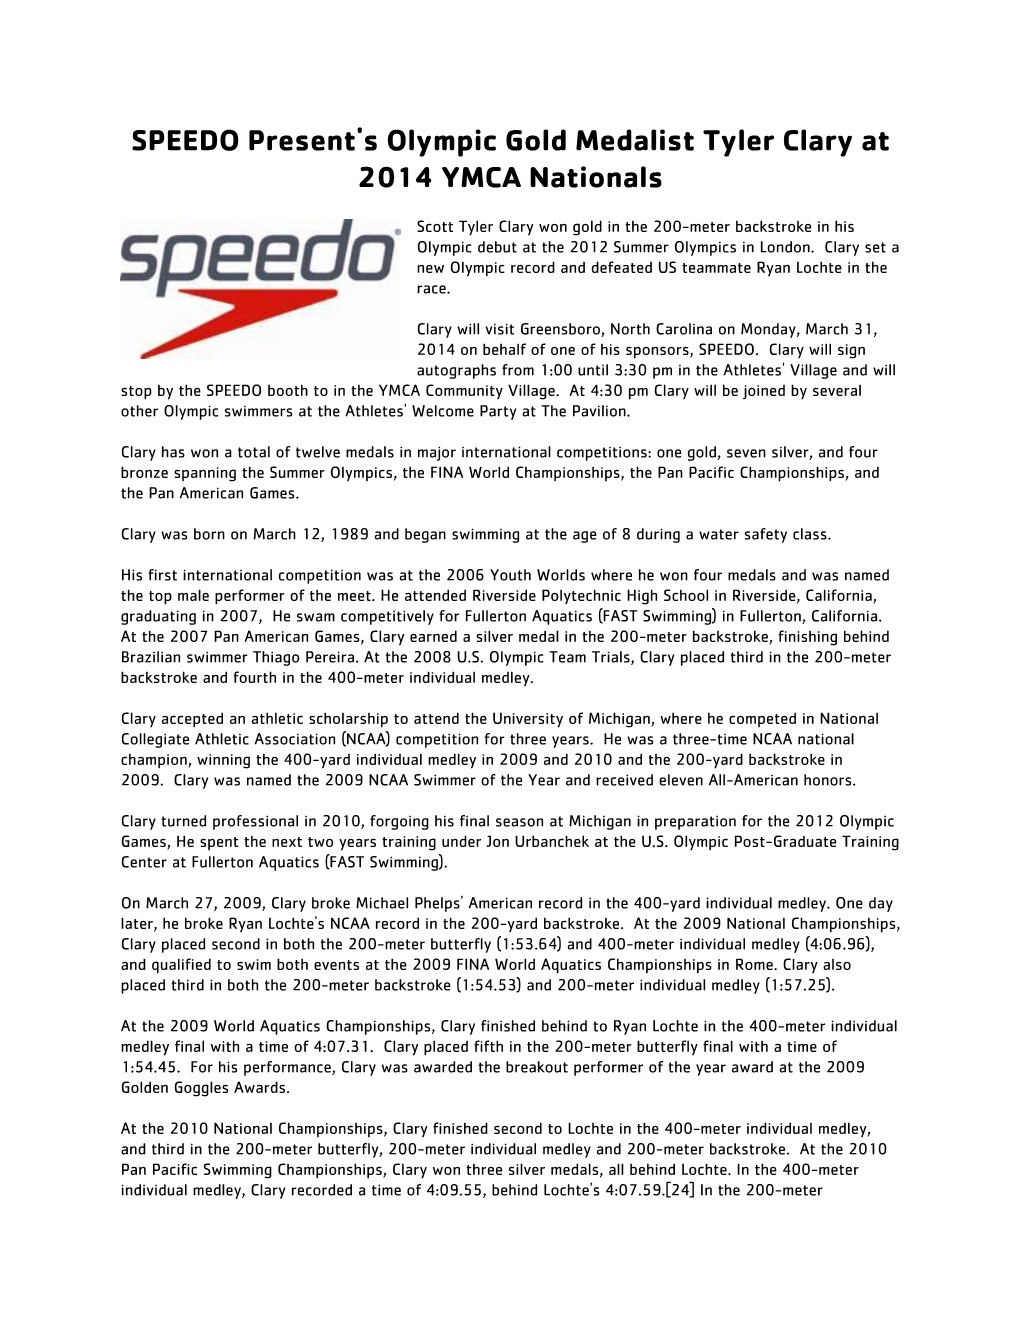 SPEEDO Present's Olympic Gold Medalist Tyler Clary at 2014 YMCA Nationals